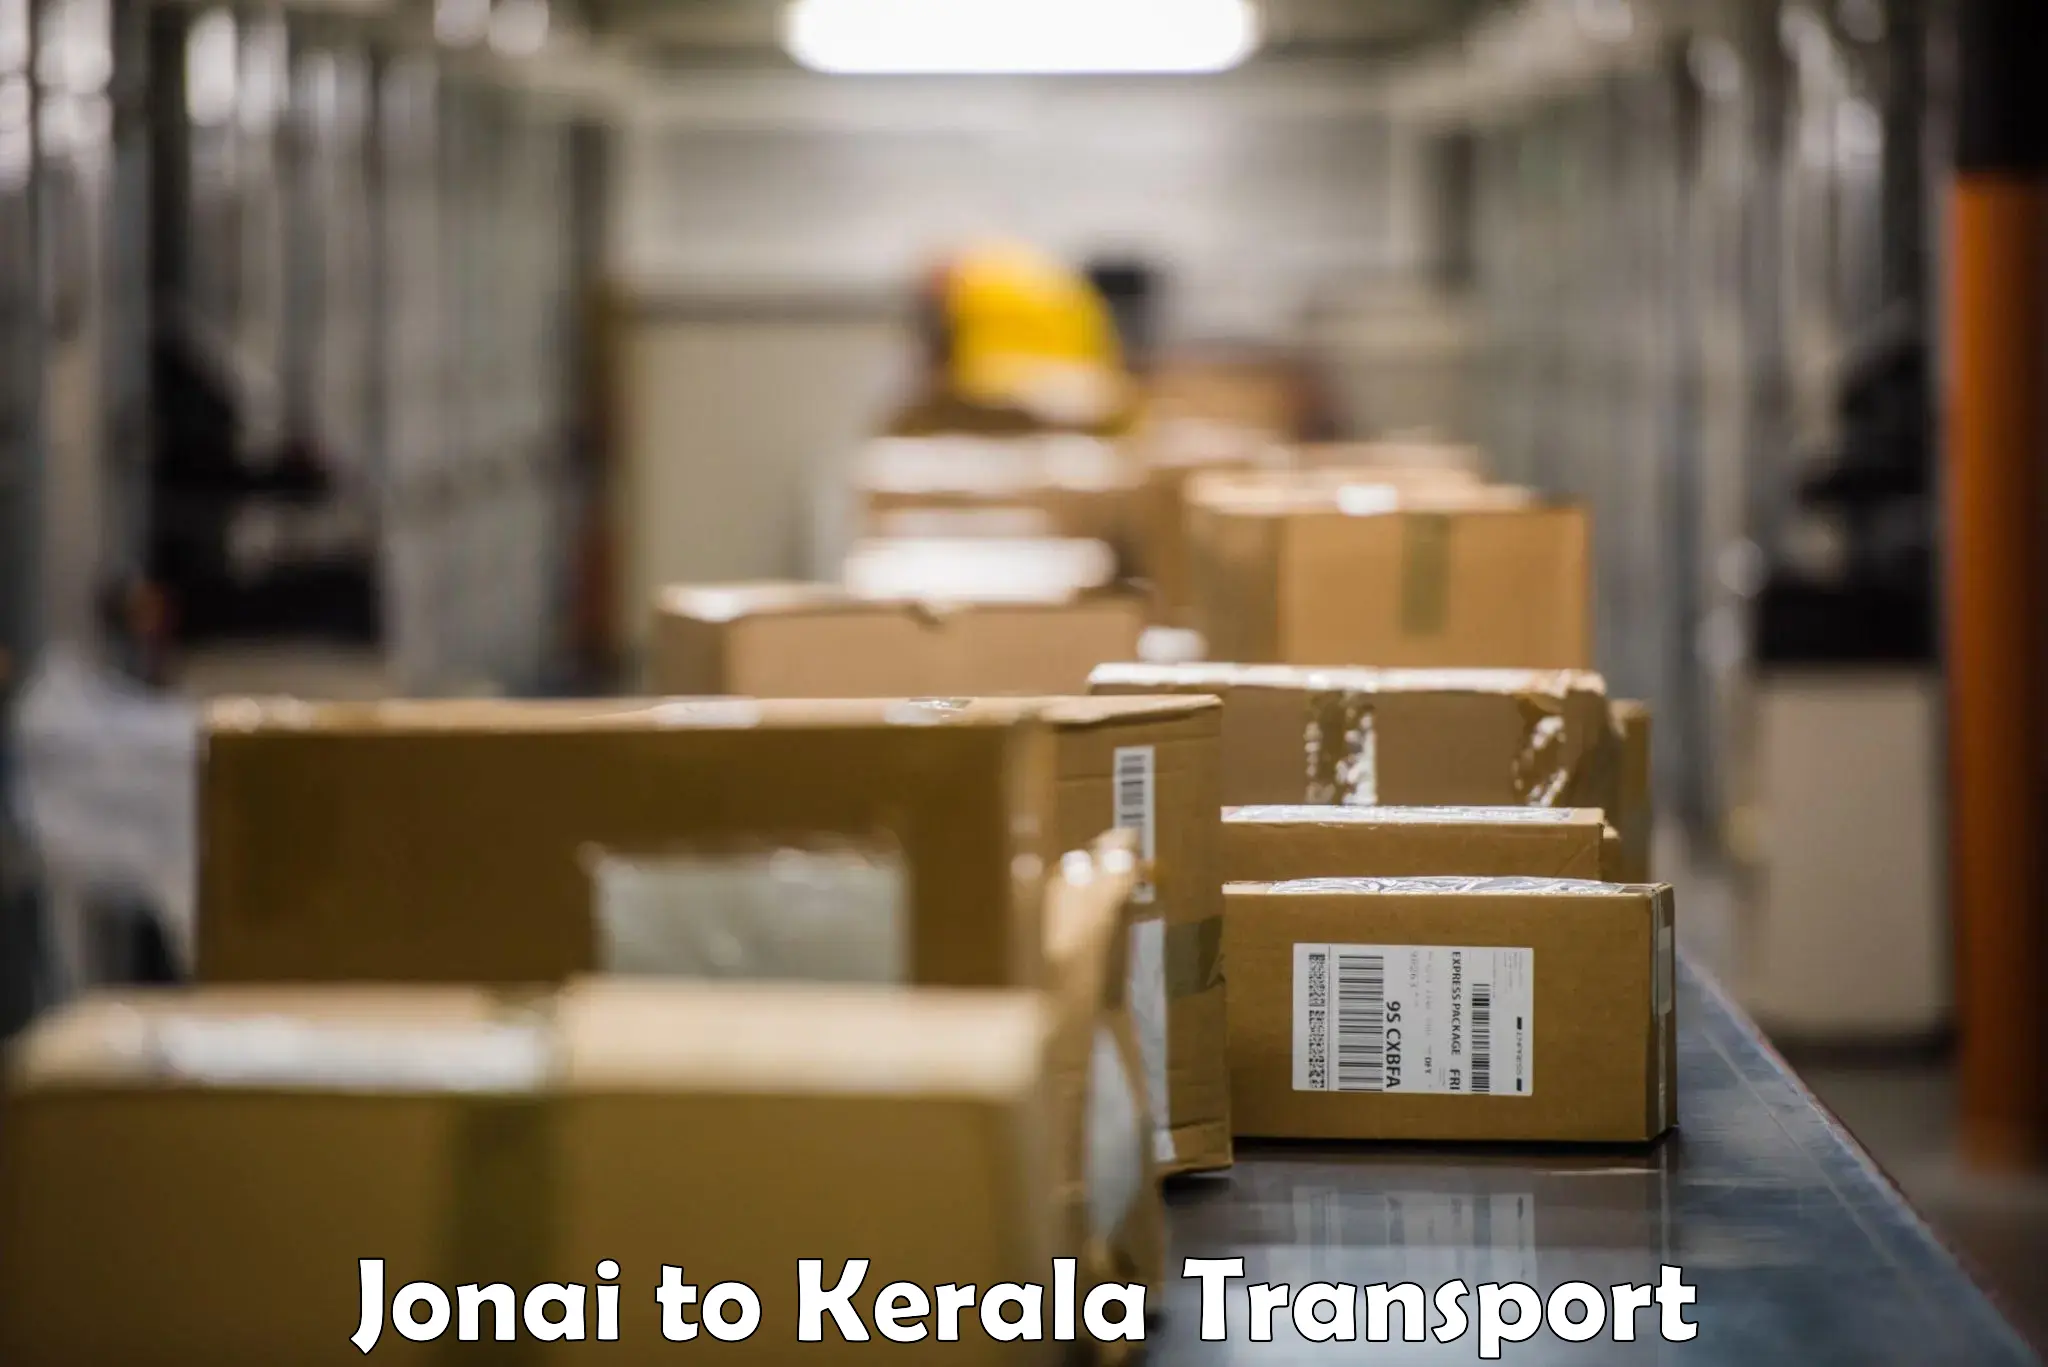 Commercial transport service Jonai to Cochin University of Science and Technology